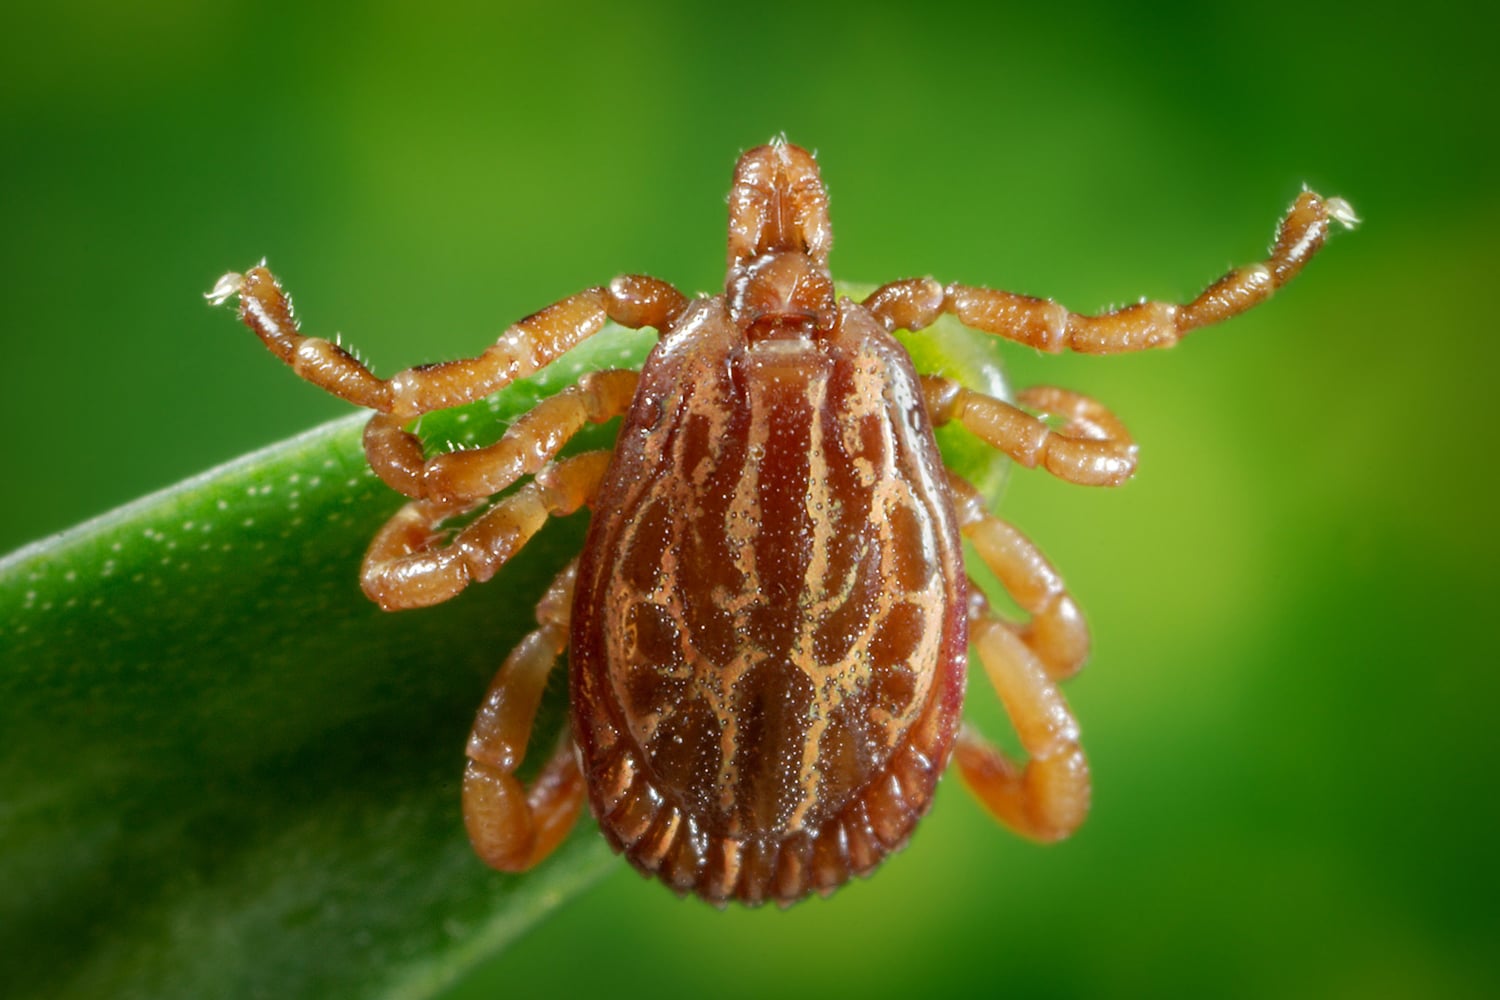 horizontal photo of a brown dog tick on a leaf with a green background - Ticks in Ohio Image credit: Tick Safety on Flickr